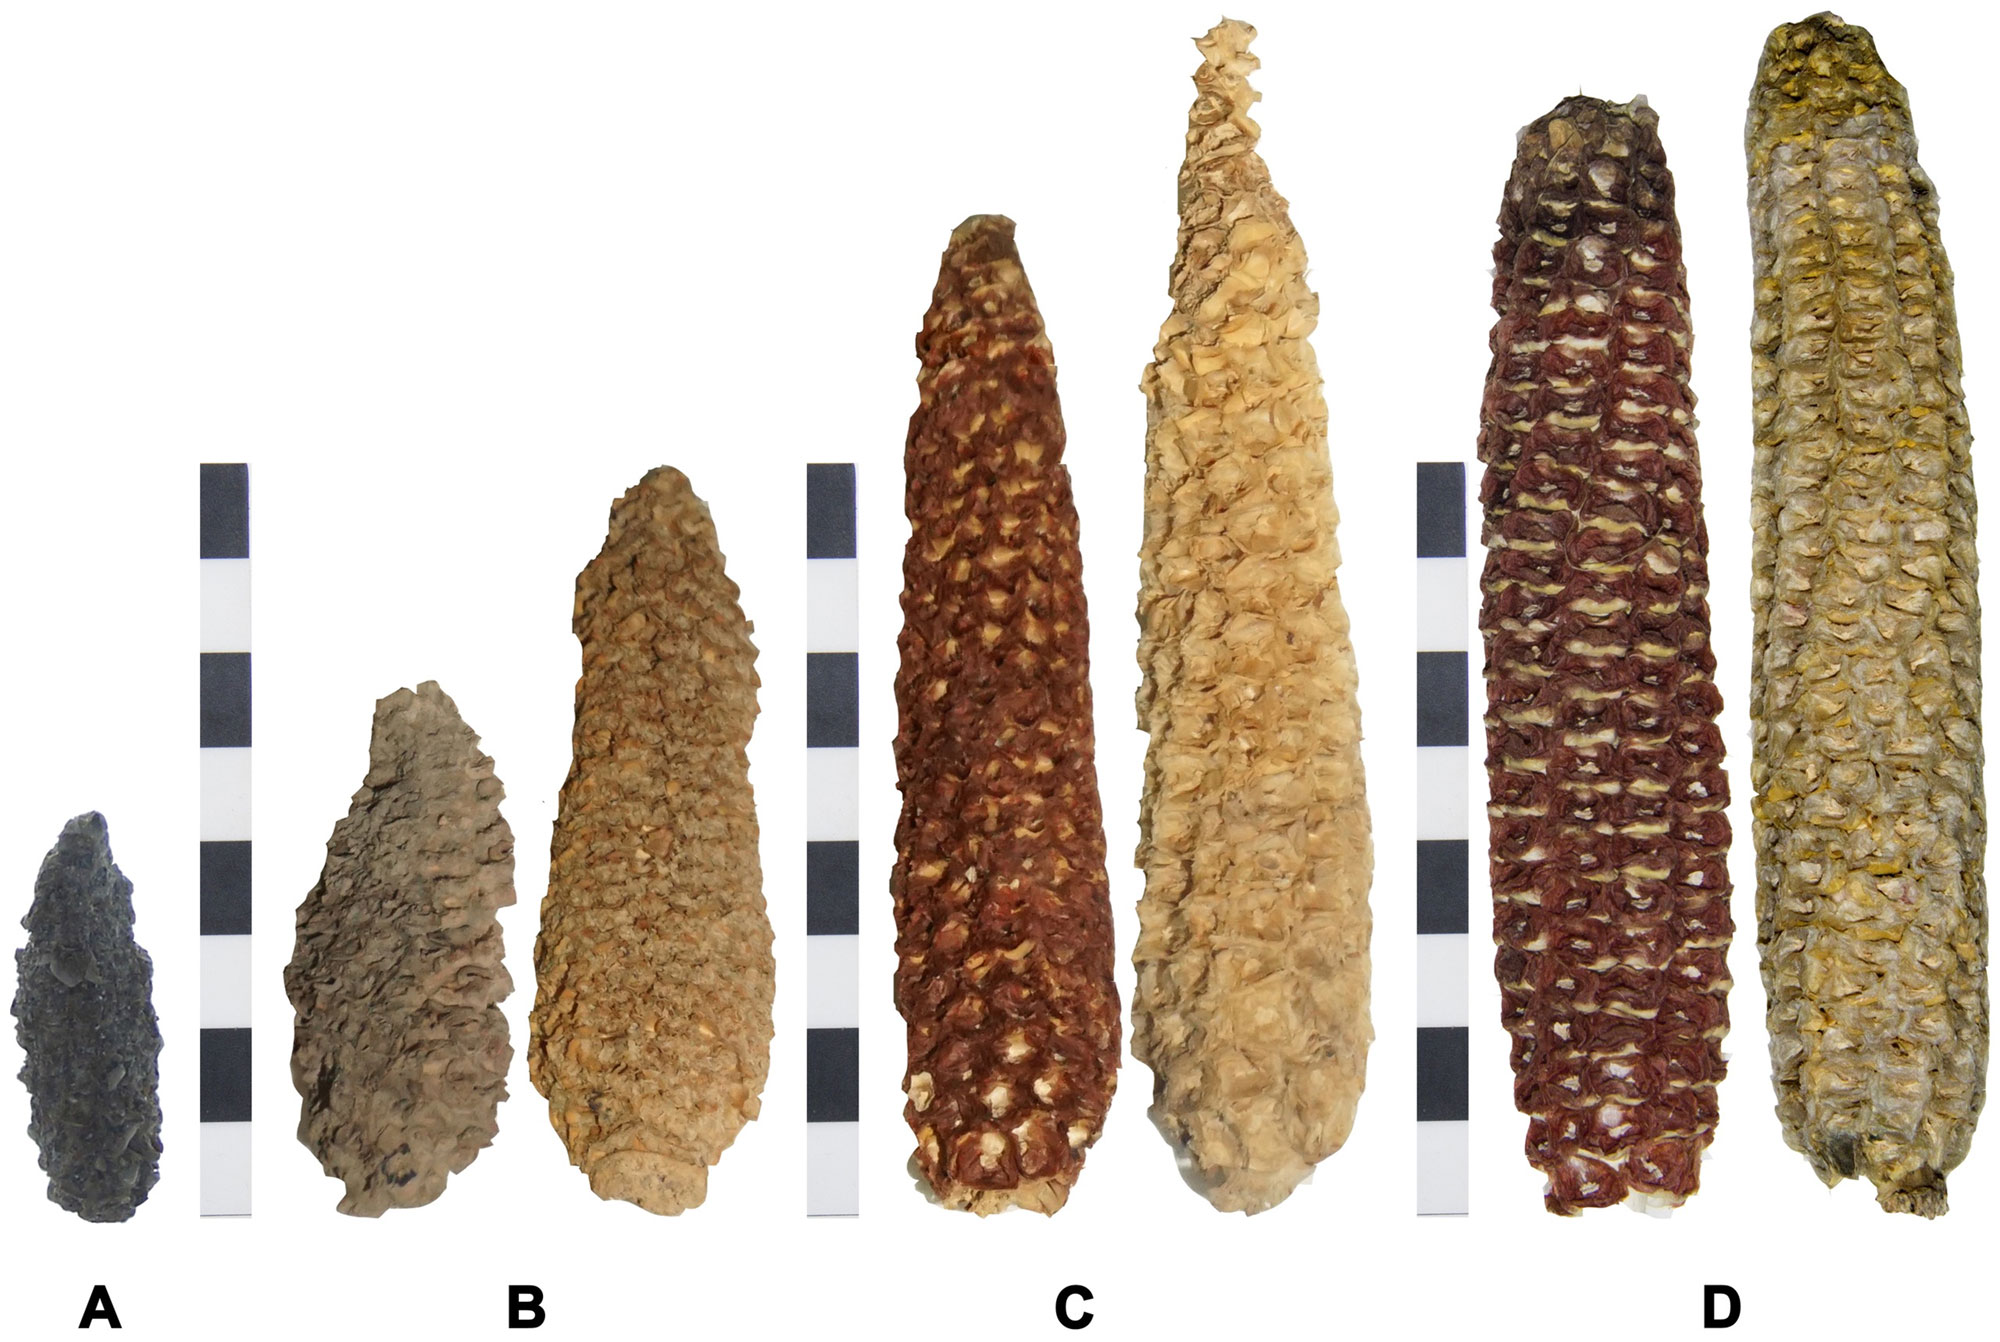 Photograph showing cobs of maize from archaeological sites and cobs of modern maize, all from the Tarapaca region of Chile. The photo shows the cobs arranged from oldest (about 2320 to 1420 years old) to youngest. The oldest is about 4.5 centimeters long and black in color. The next youngest (930 to 490 years old) are 6 to 8 cm long. The youngest (662 to 350 years old and modern cobs) are more than 8 cm long.